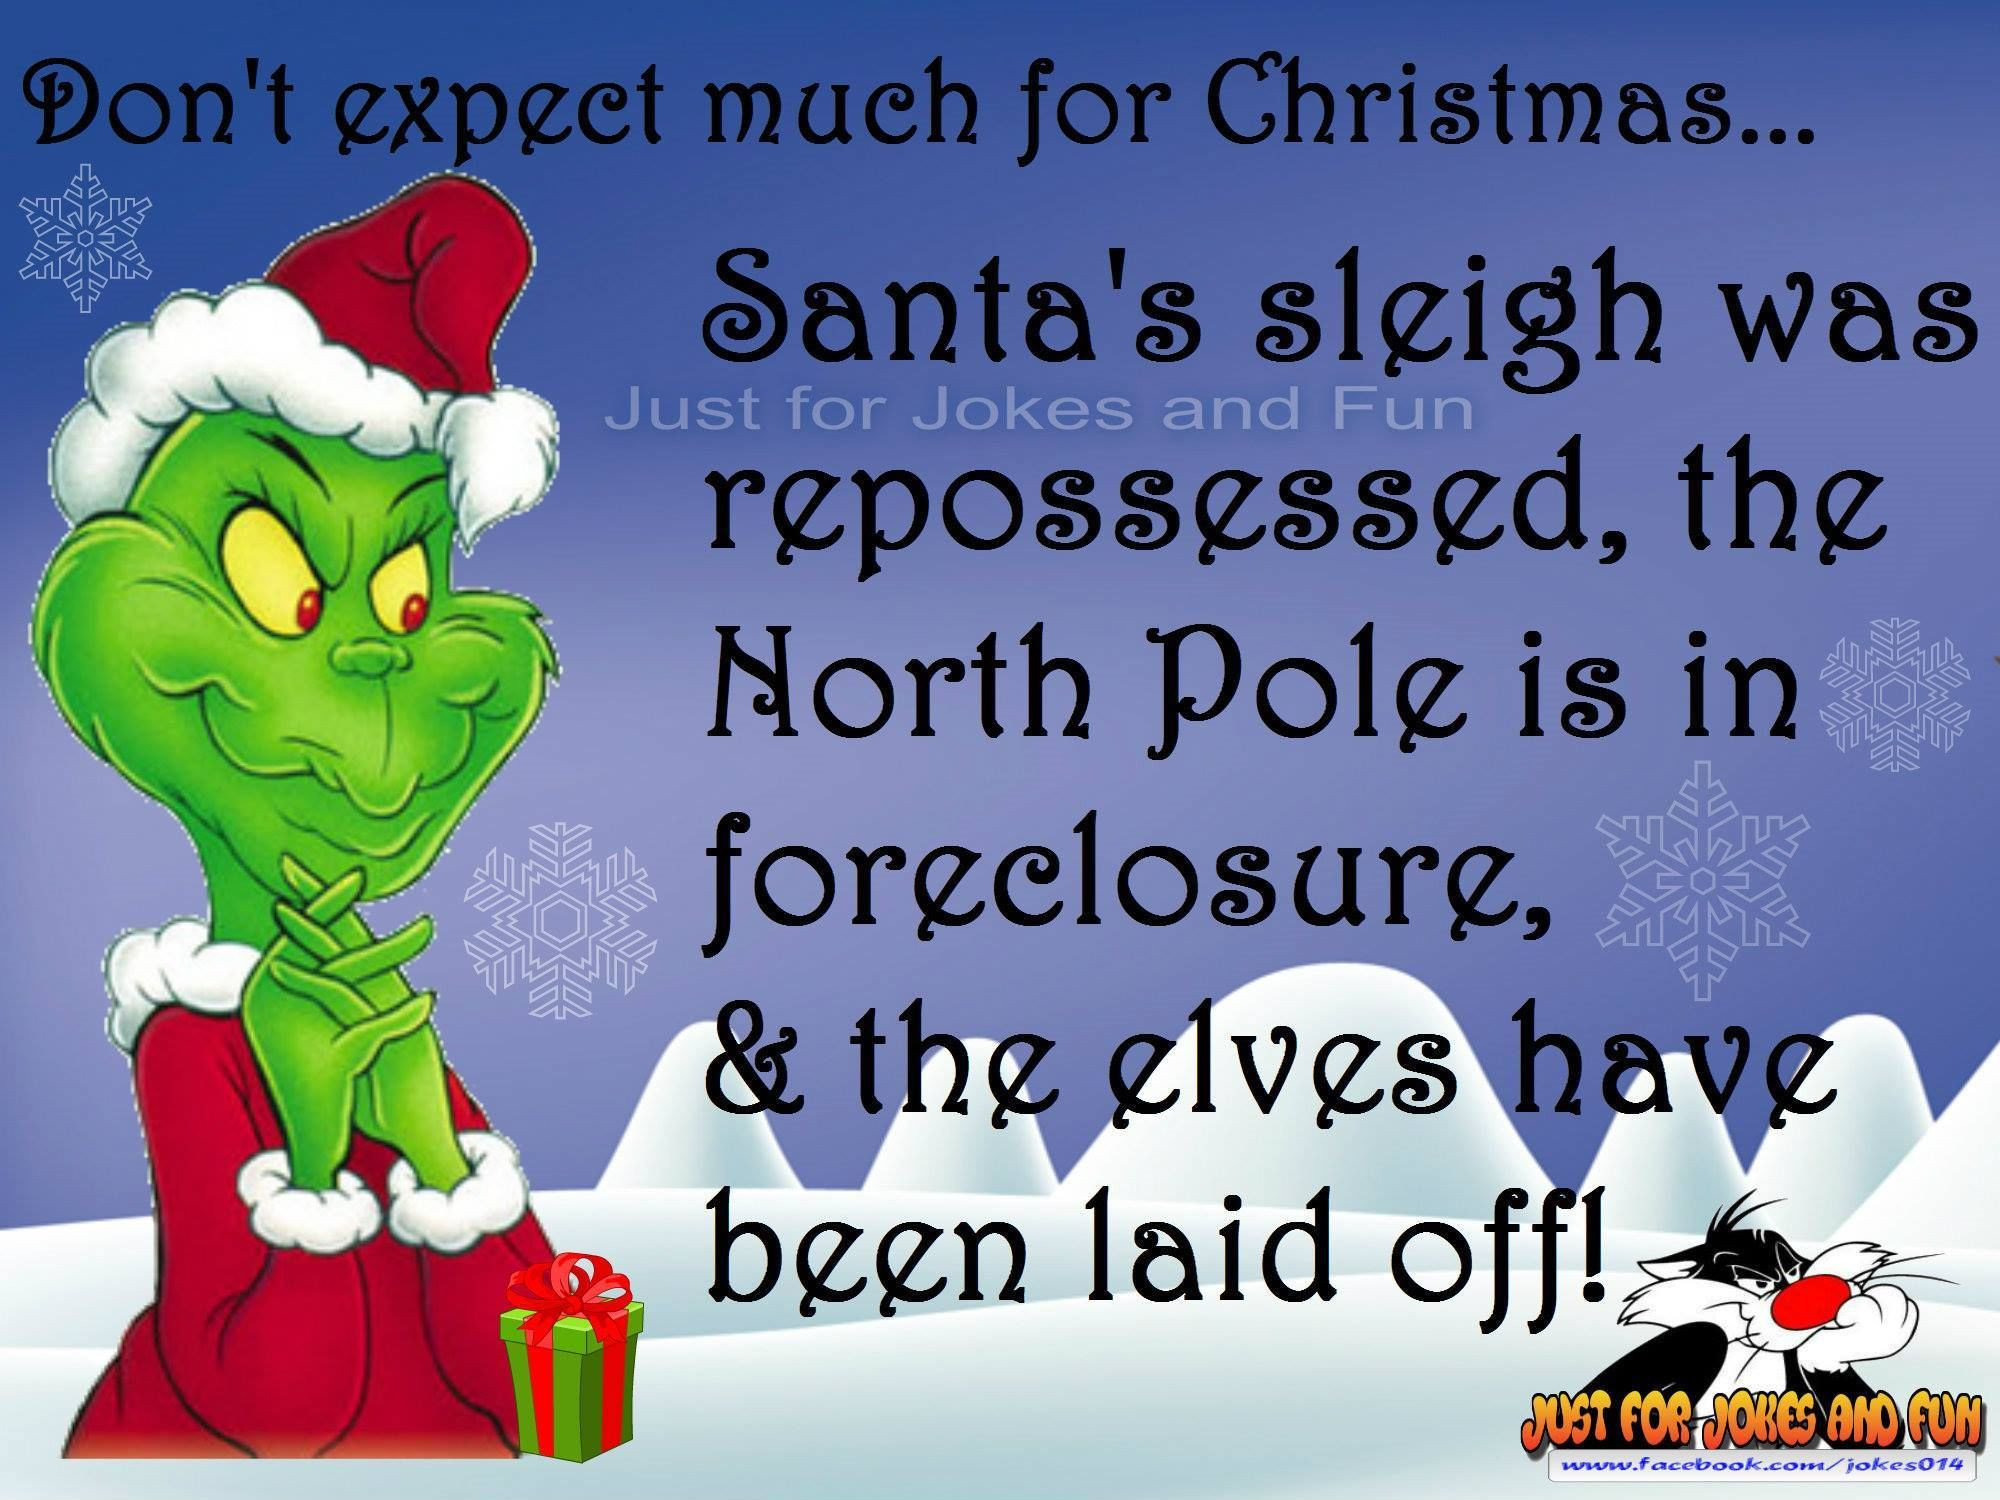 Merry Christmas Funny Quotes
 Funny Christmas Quote With The Grinch s